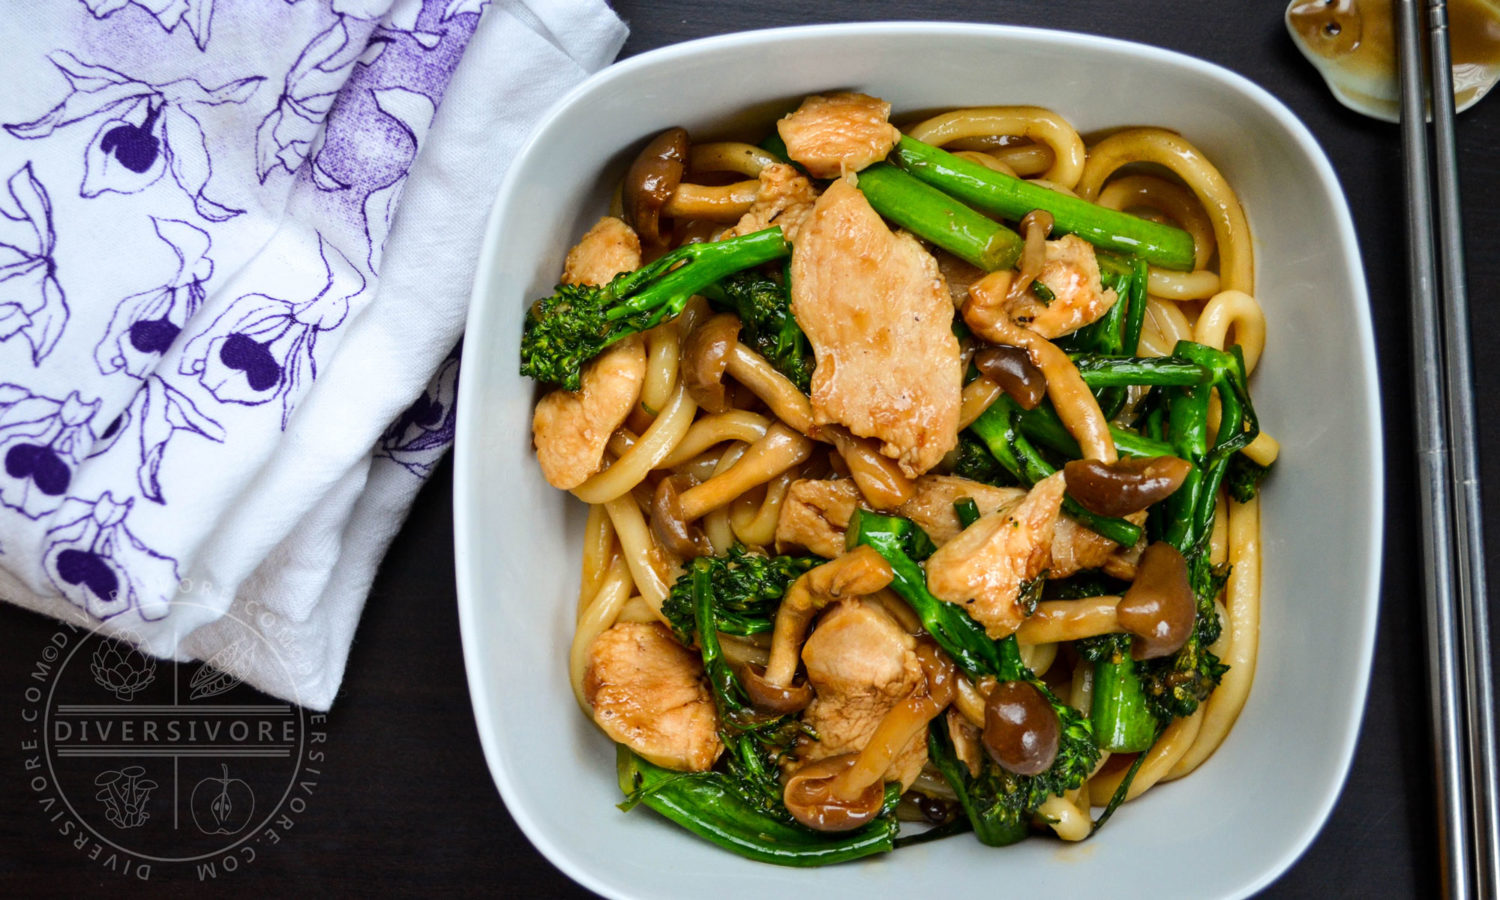 Stir Fried Udon with Chicken, Shimeji, and Broccolini - Japanese ingredients with a Chinese twist - Diversivore.com